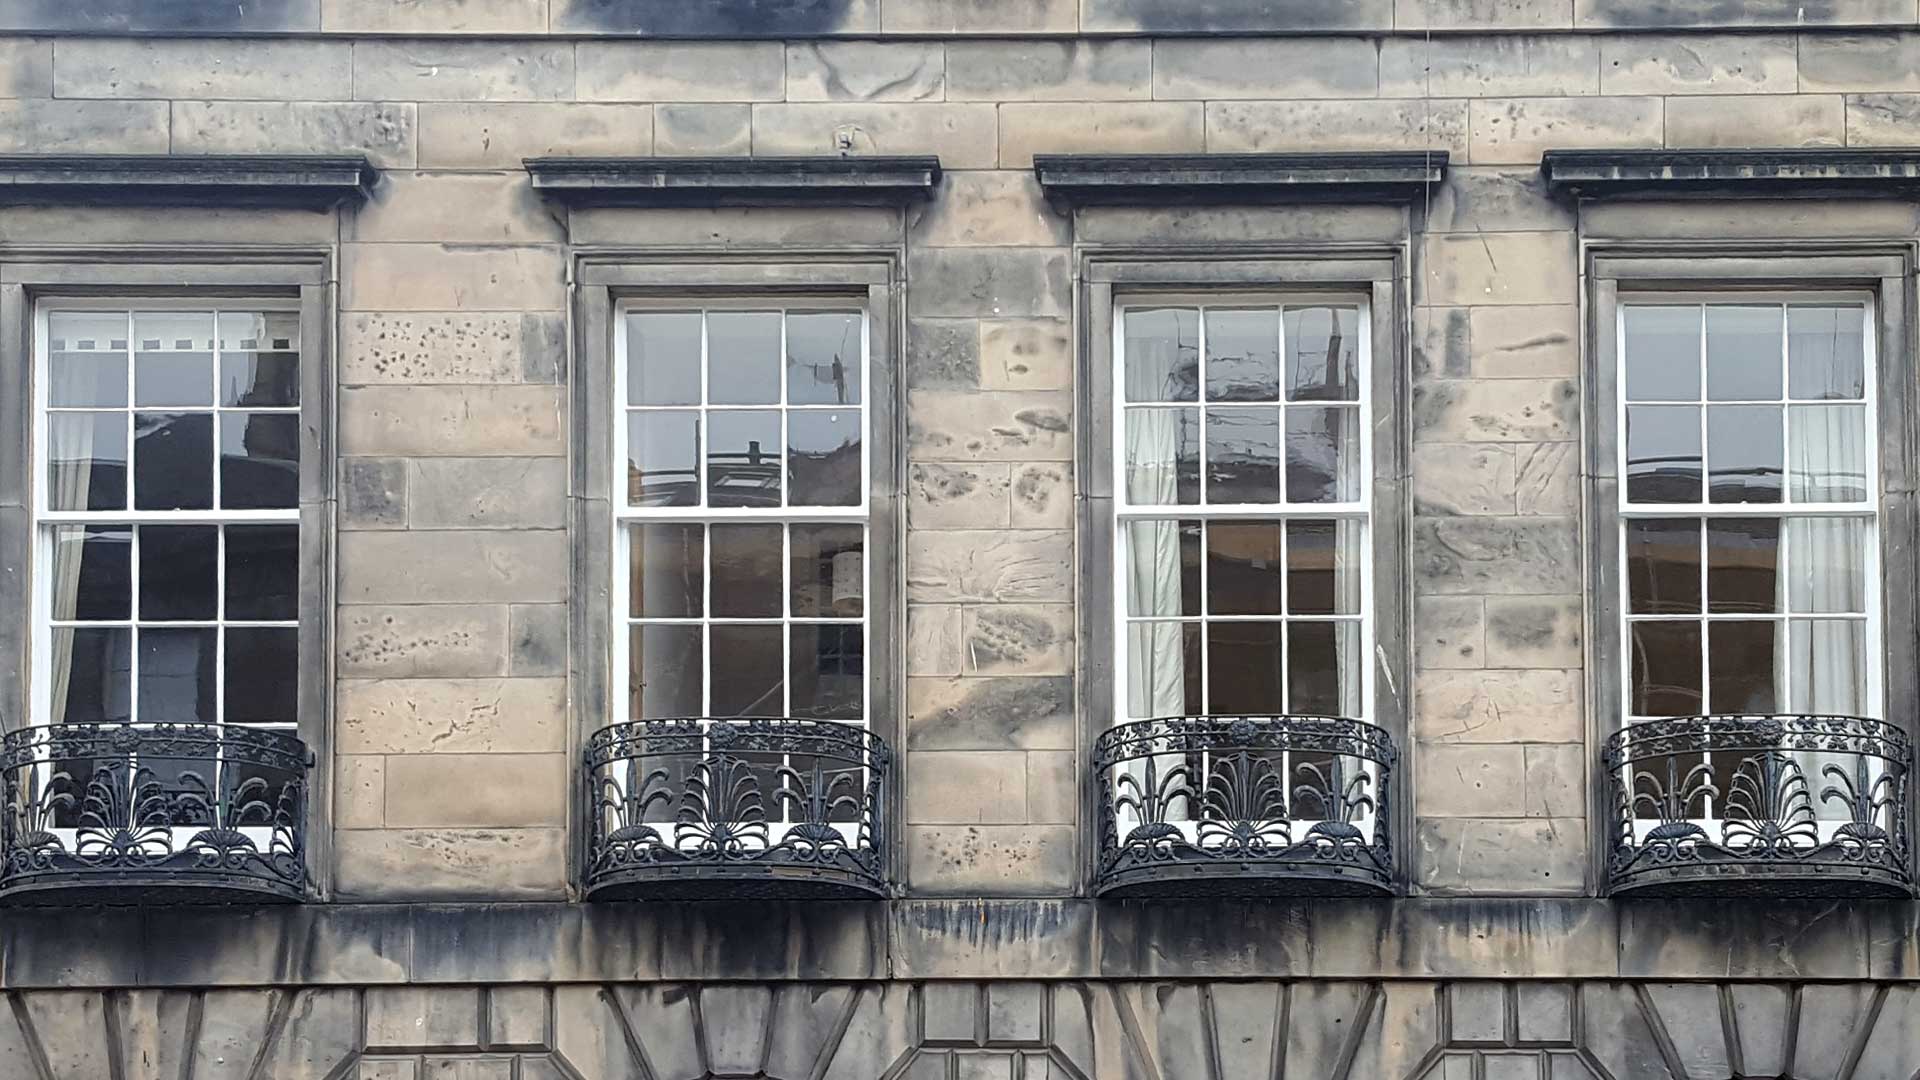 Image of a Sash and Case window in Edinburgh, restored by the Sash and Case Painting Co